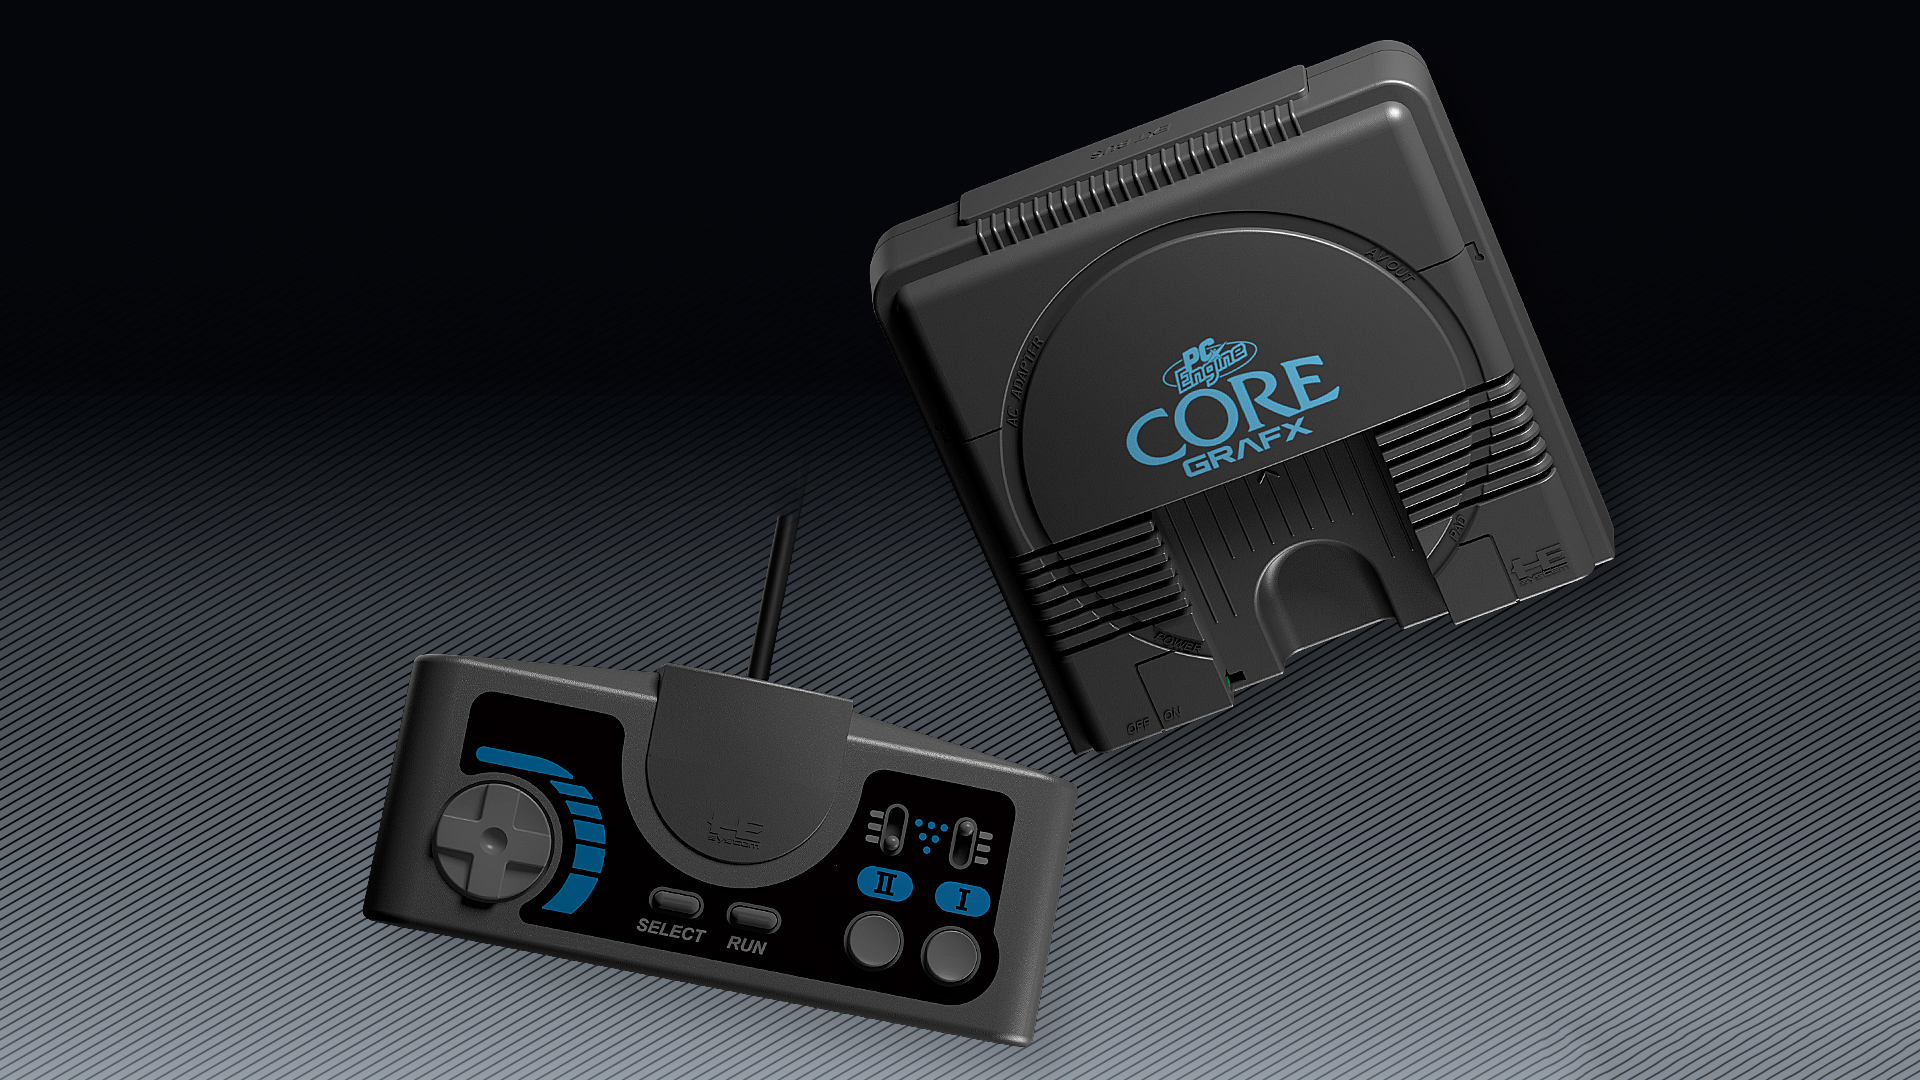 Why the PC Engine CoreGrafx Mini is a must for Retro Gamers